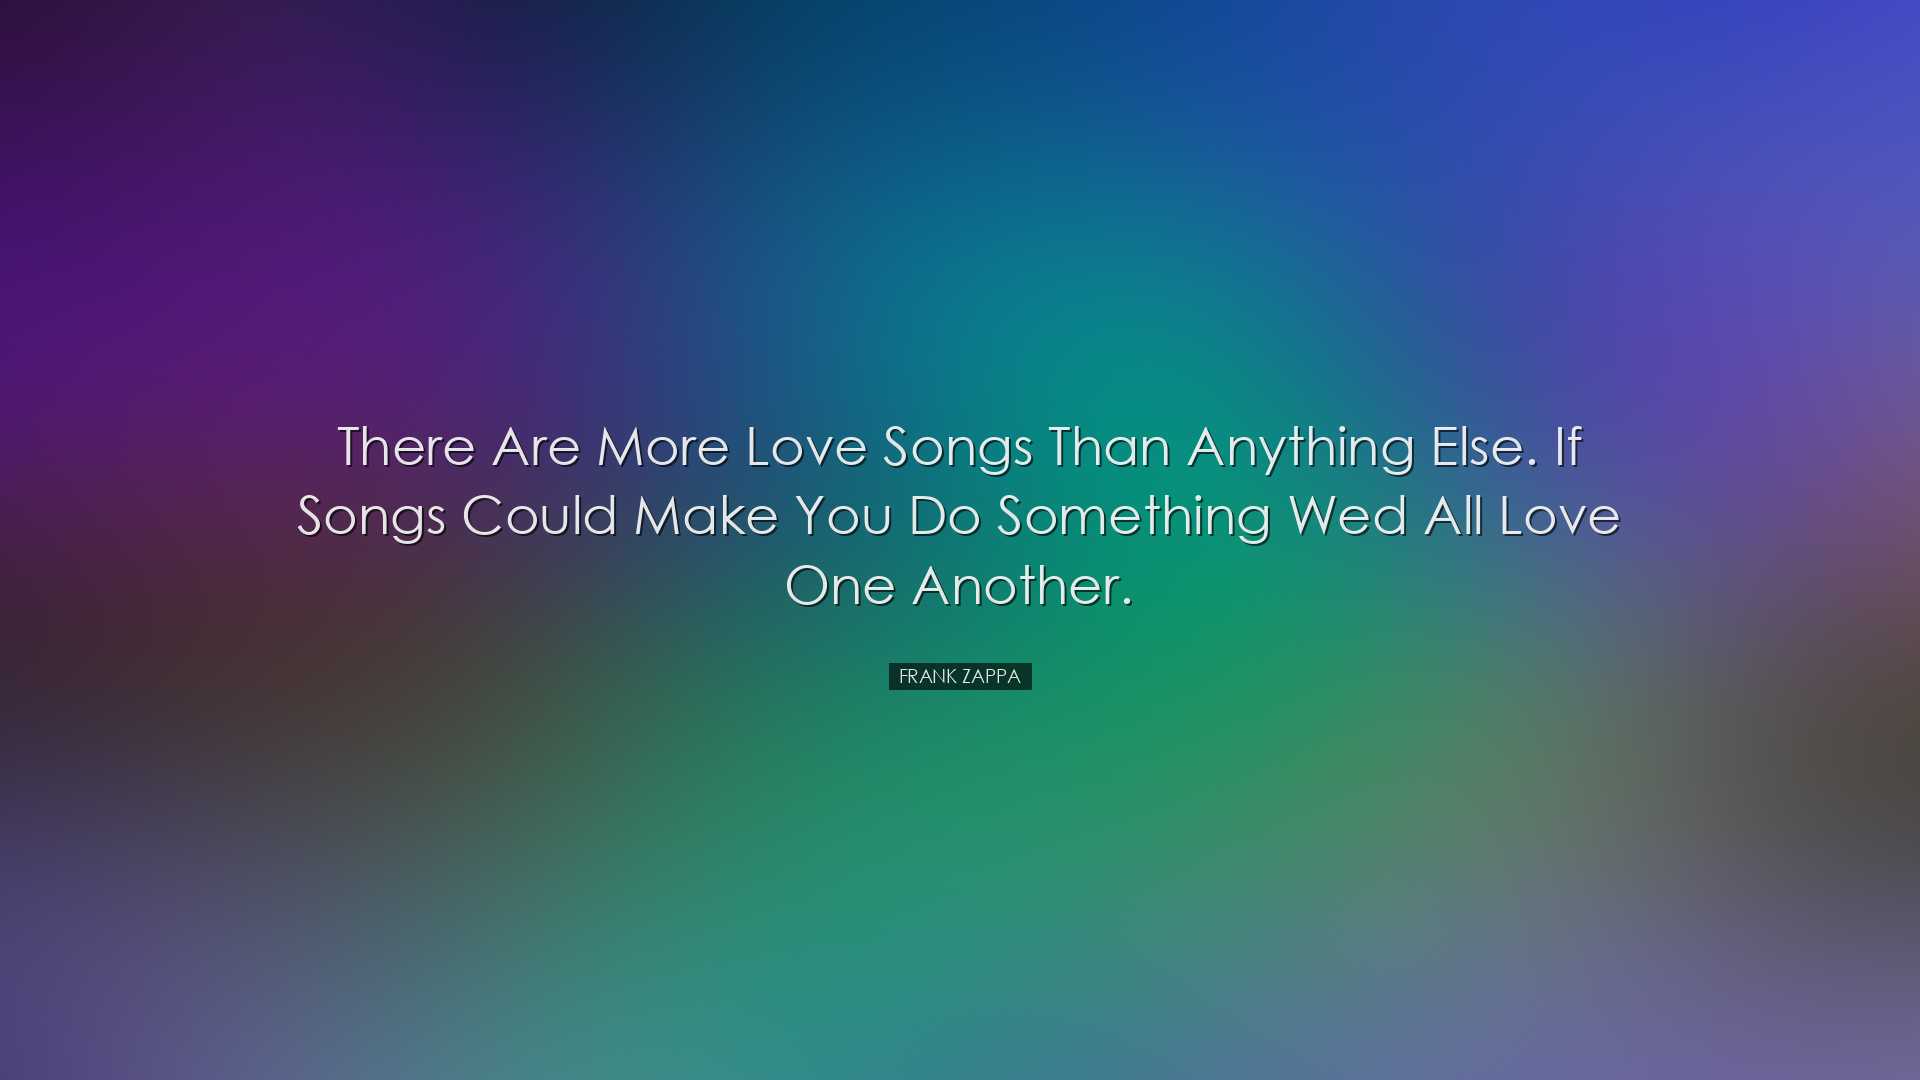 There are more love songs than anything else. If songs could make